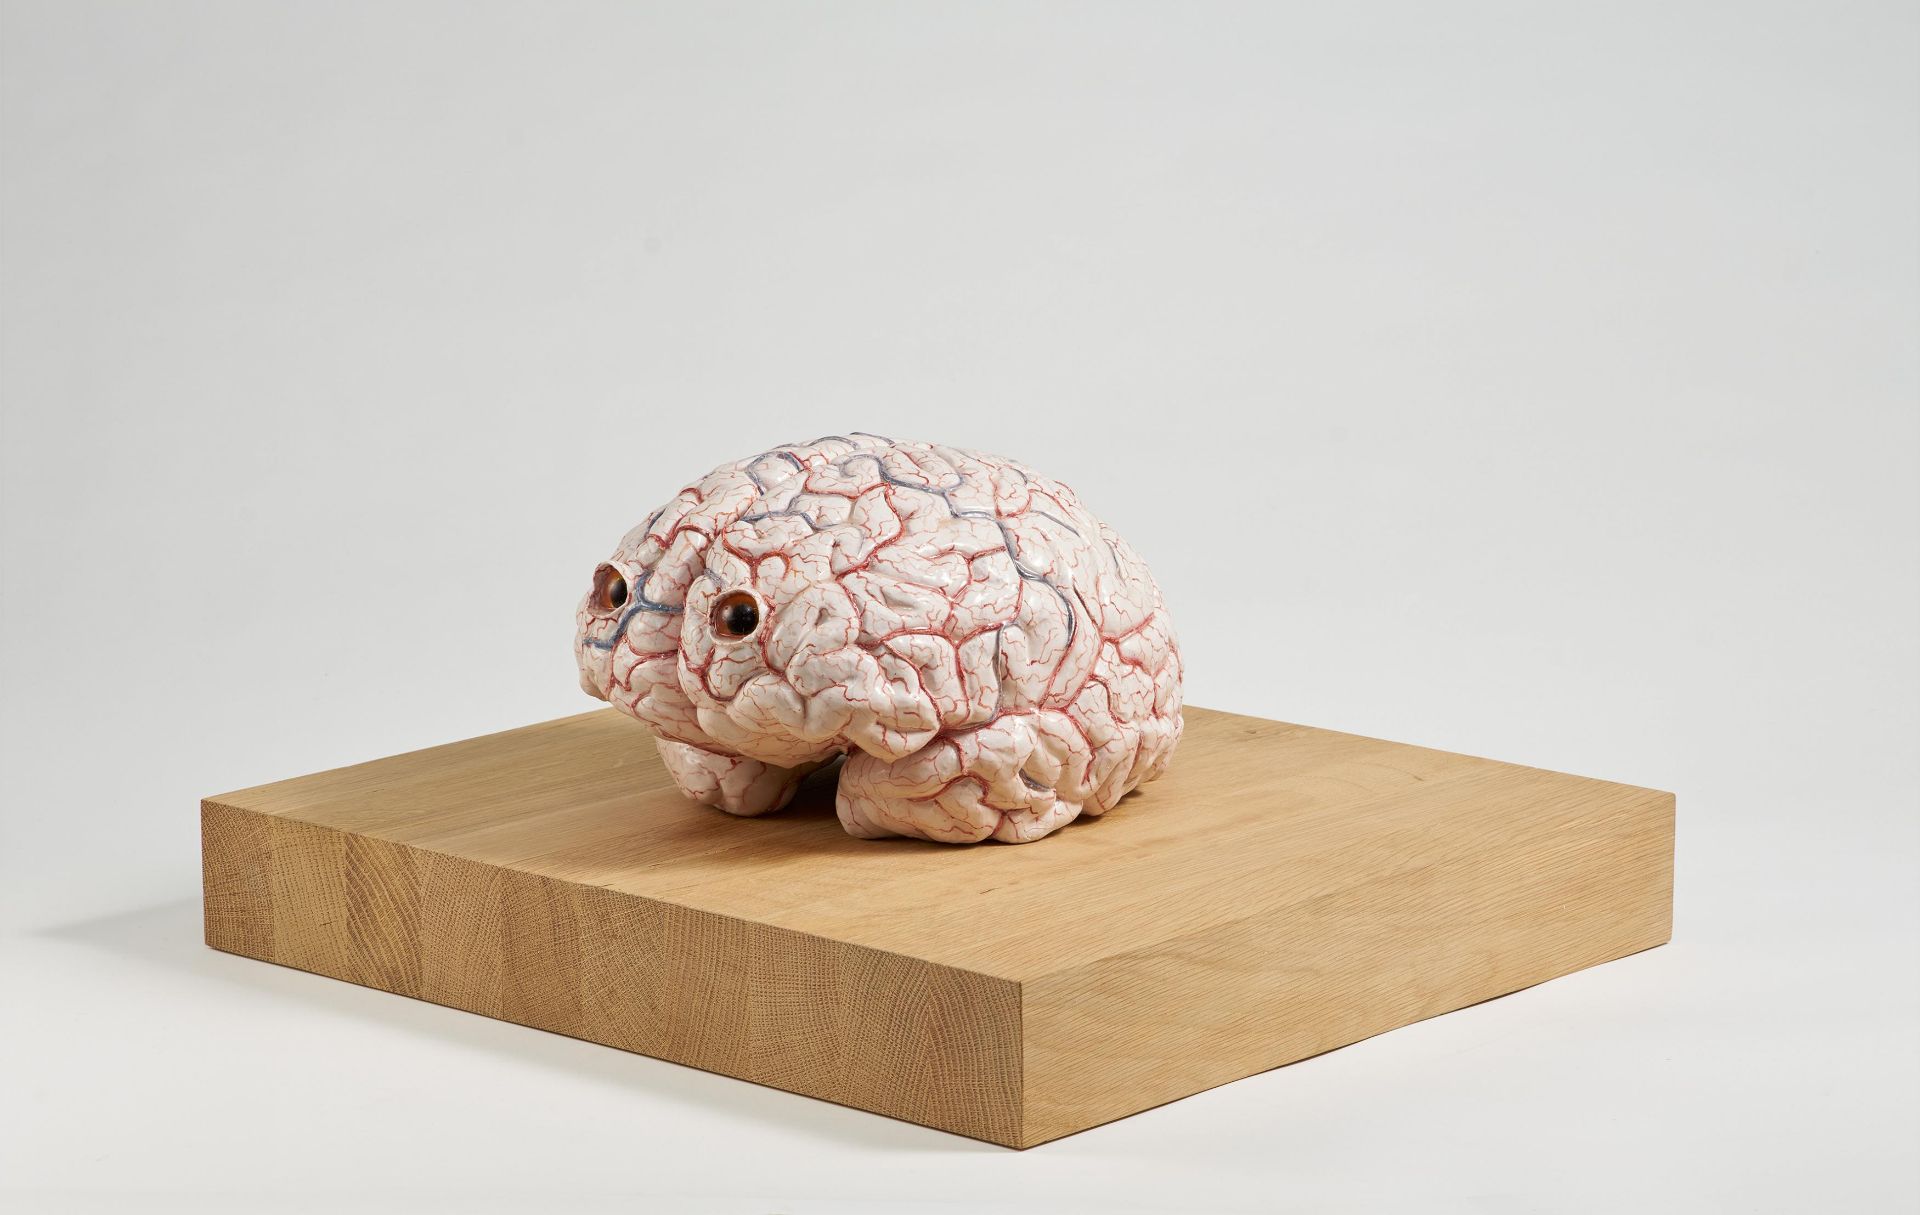 Jan Fabre: The Brain of a Messenger of COLth - Image 2 of 4